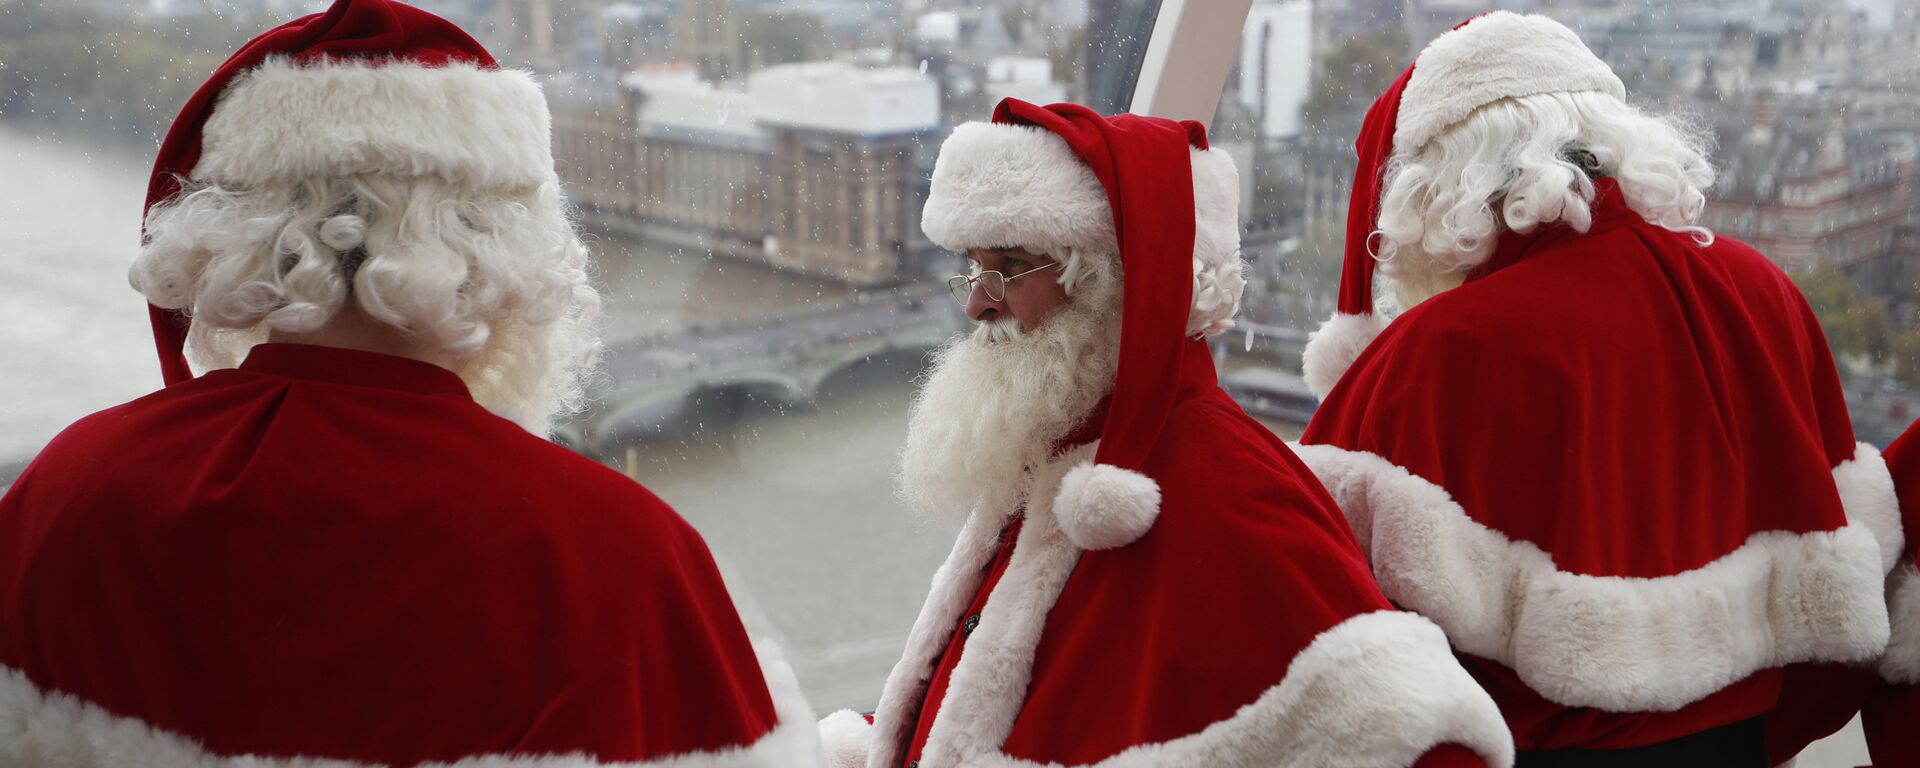 Santas from the Santa School take a look at the London skyline from a pod in the London Eye in London, Tuesday, Nov. 6, 2018. These Santas will be working in shops and malls around London as the Christmas season approaches. - Sputnik International, 1920, 15.12.2022